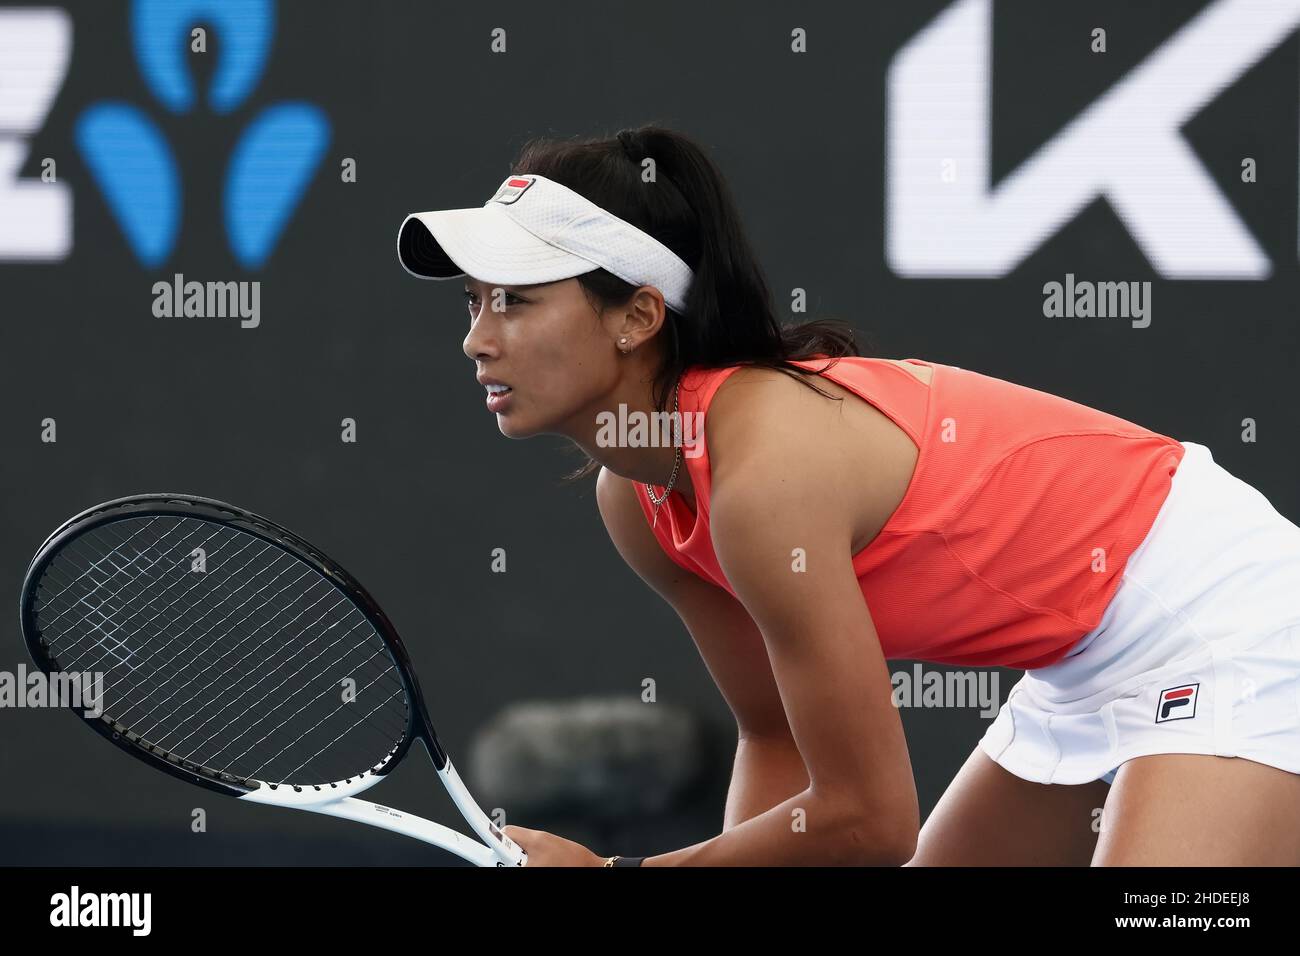 Adelaide, Australia, 6 January, 2022. Priscilla Hon of Australia during the  WTA singles match between Priscilla Hon of Australia and Victoria Azarenka  of Belarus on day four of the Adelaide International tennis